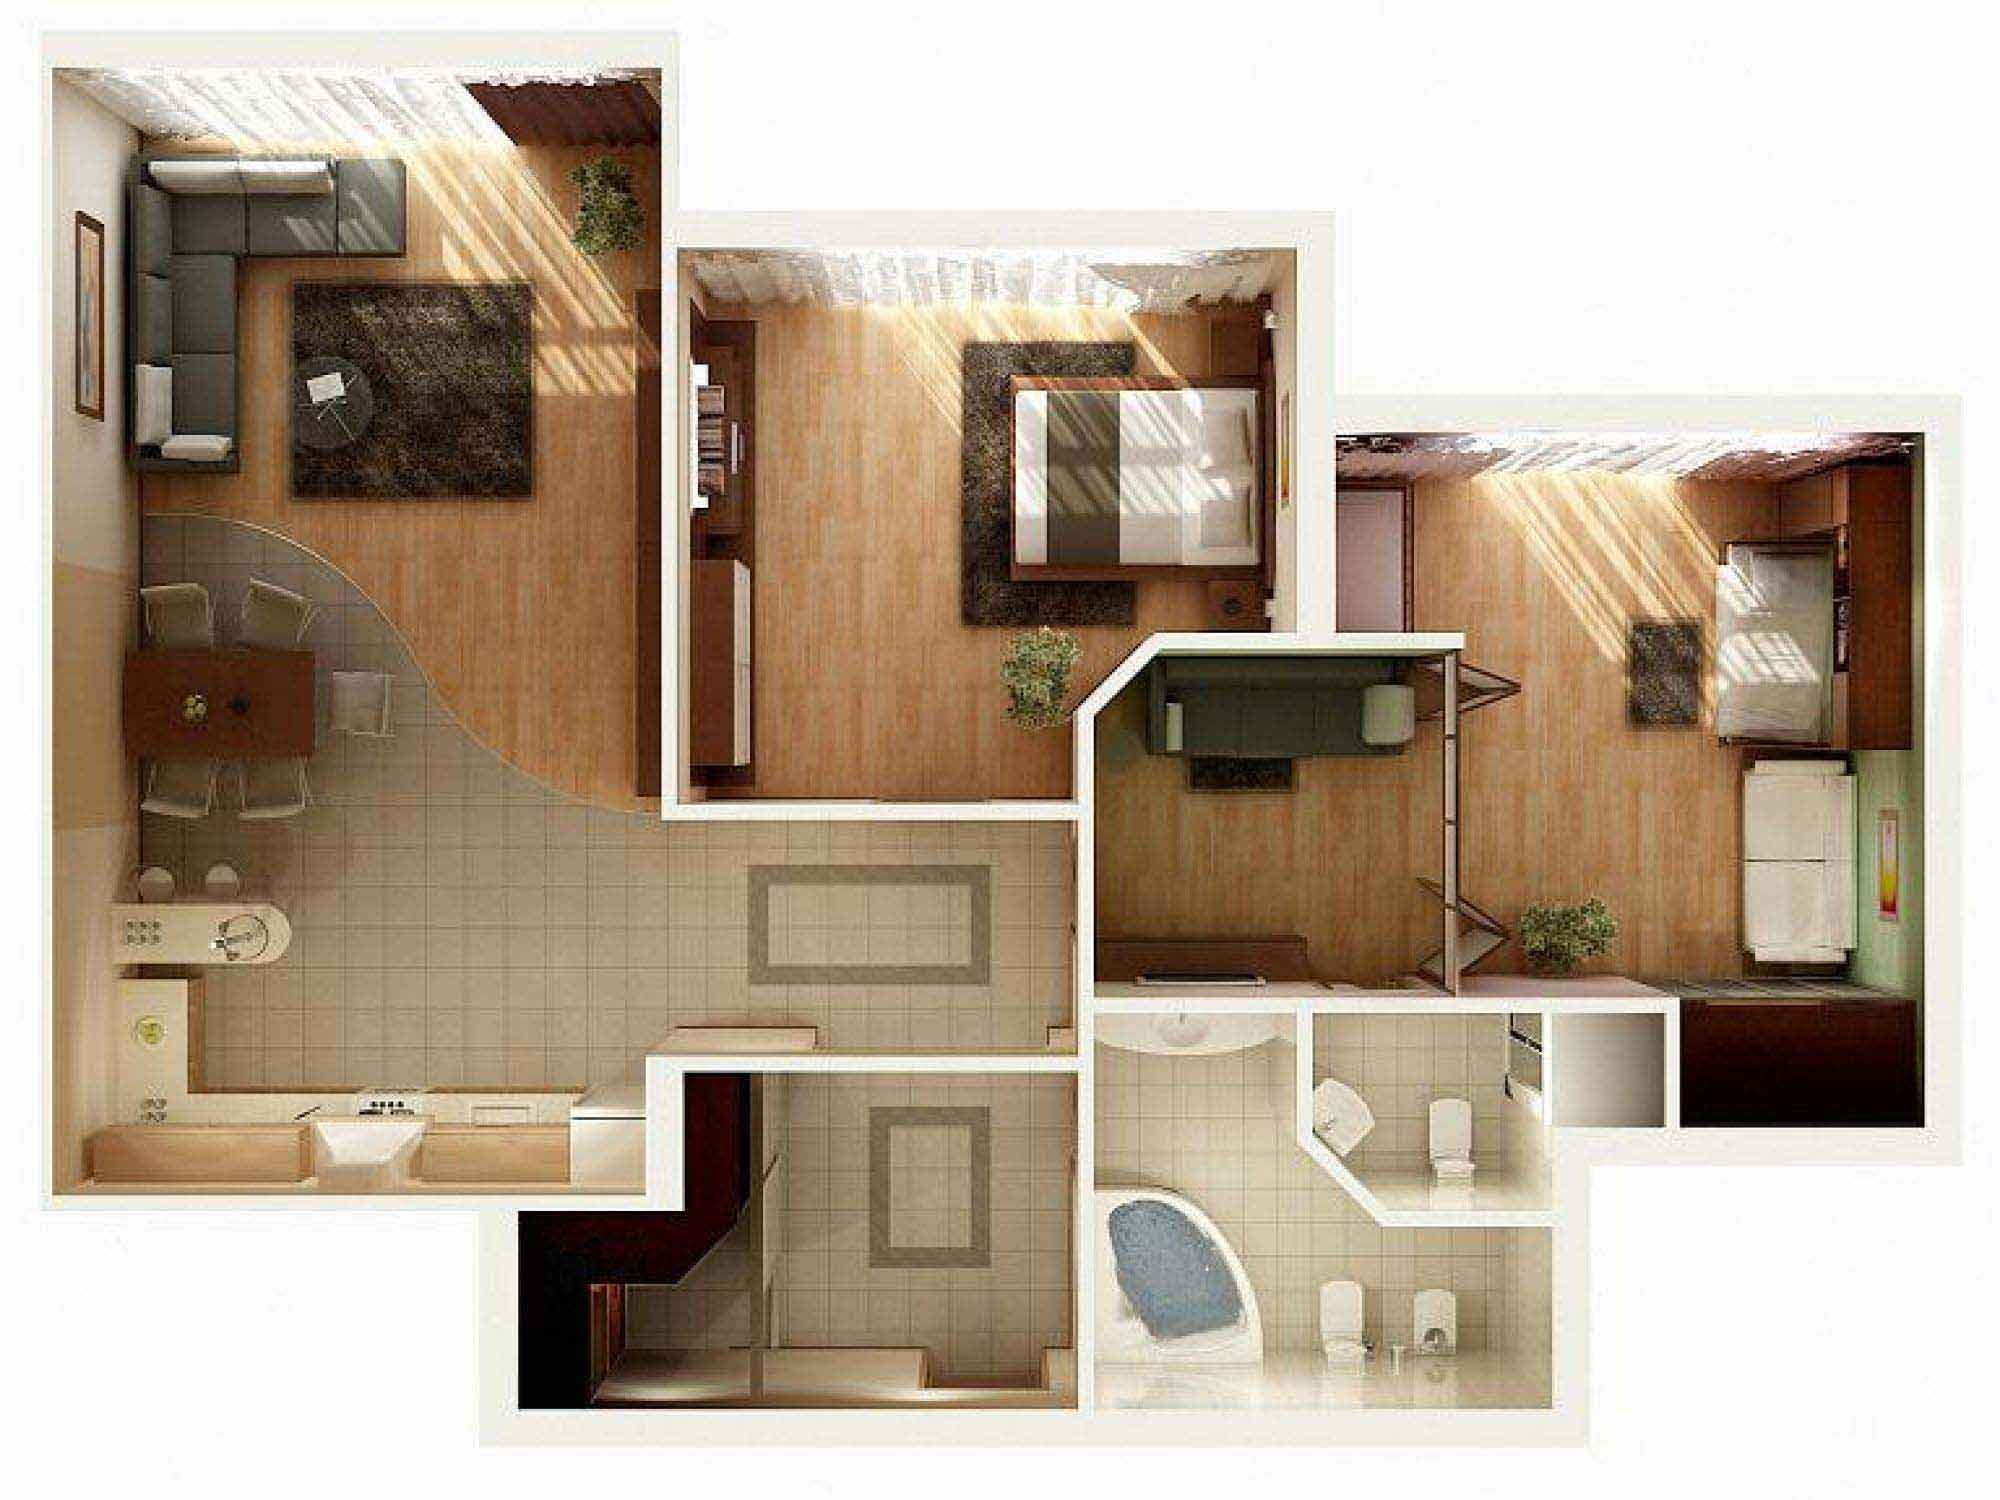 Scientific layout for 4 typical 2-bedroom apartments - Photo 7.